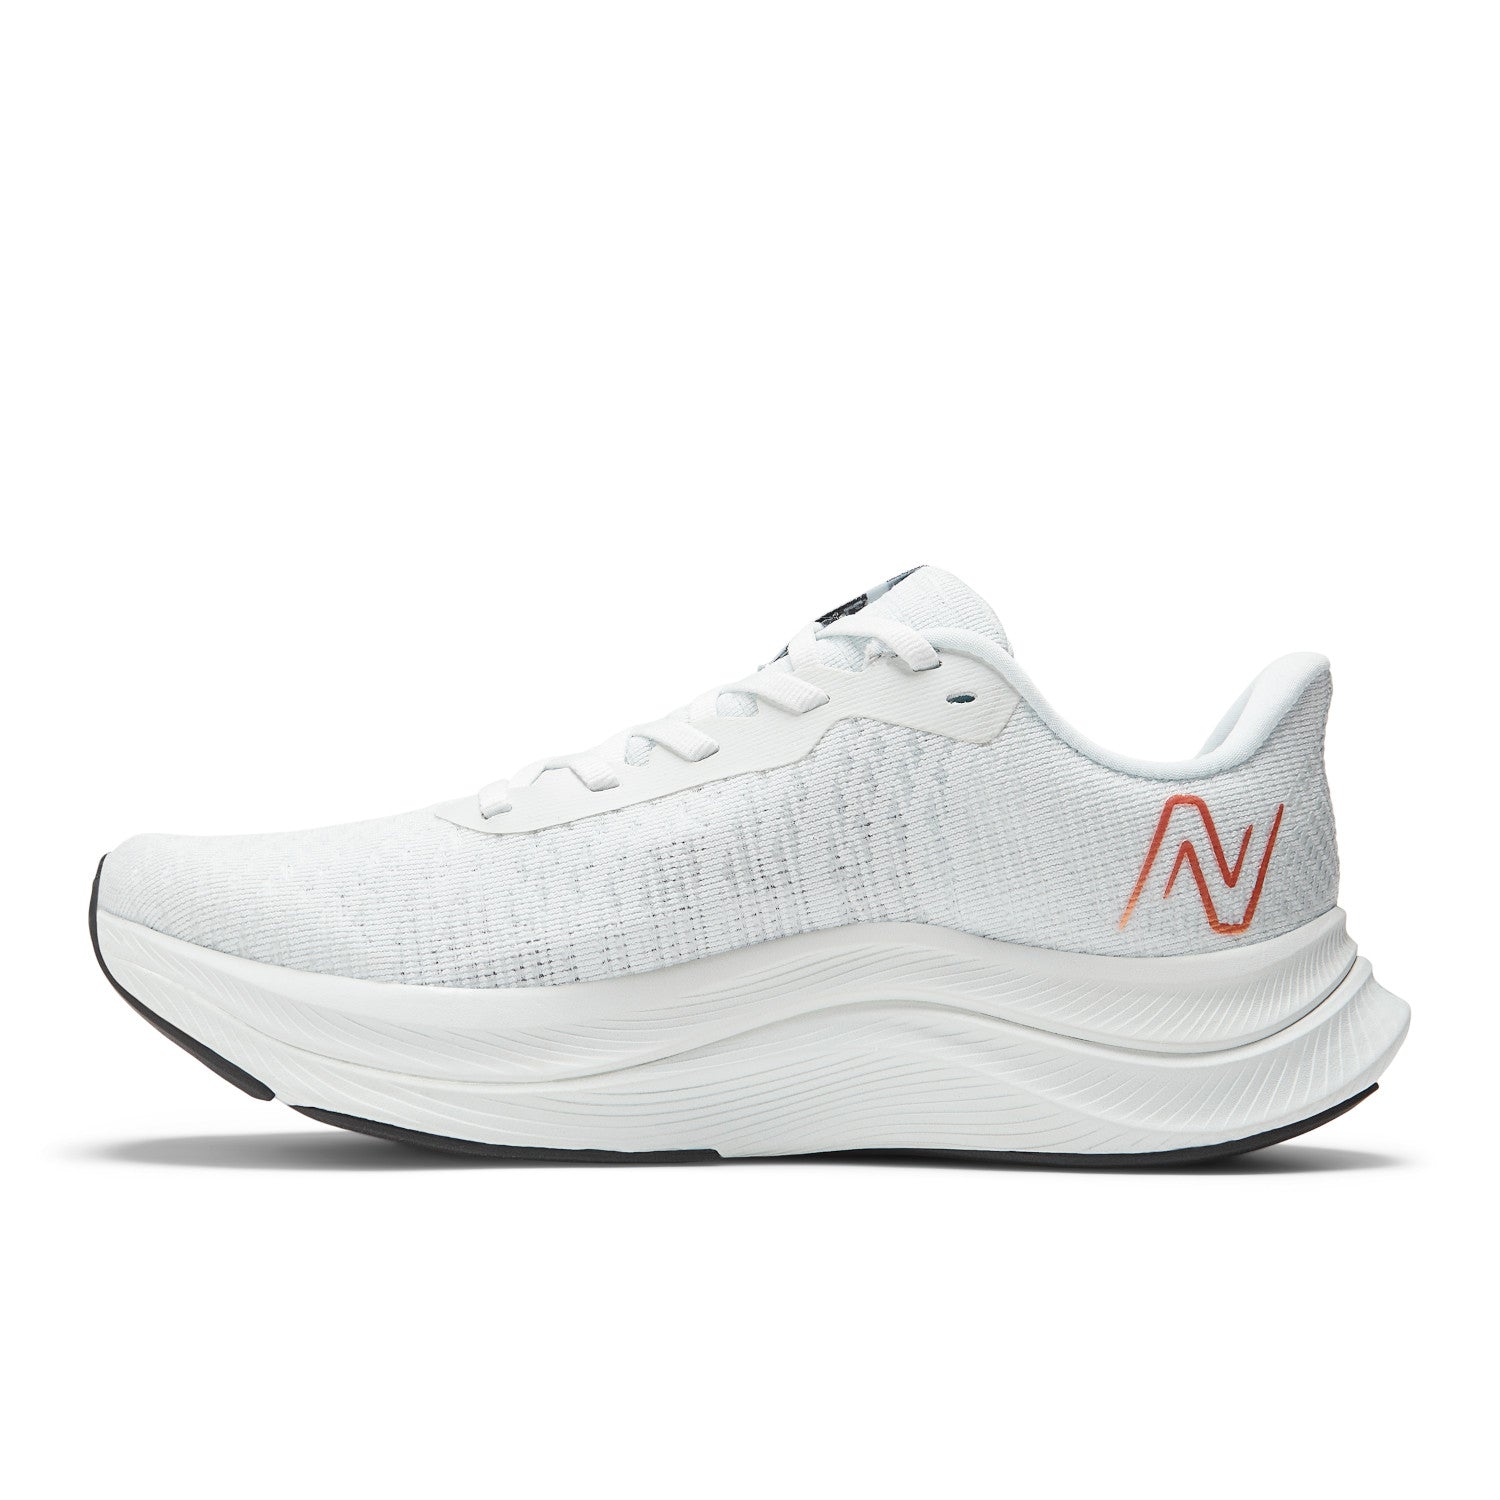 New Balance FuelCell Propel v4 WFCPRGB4 Women's